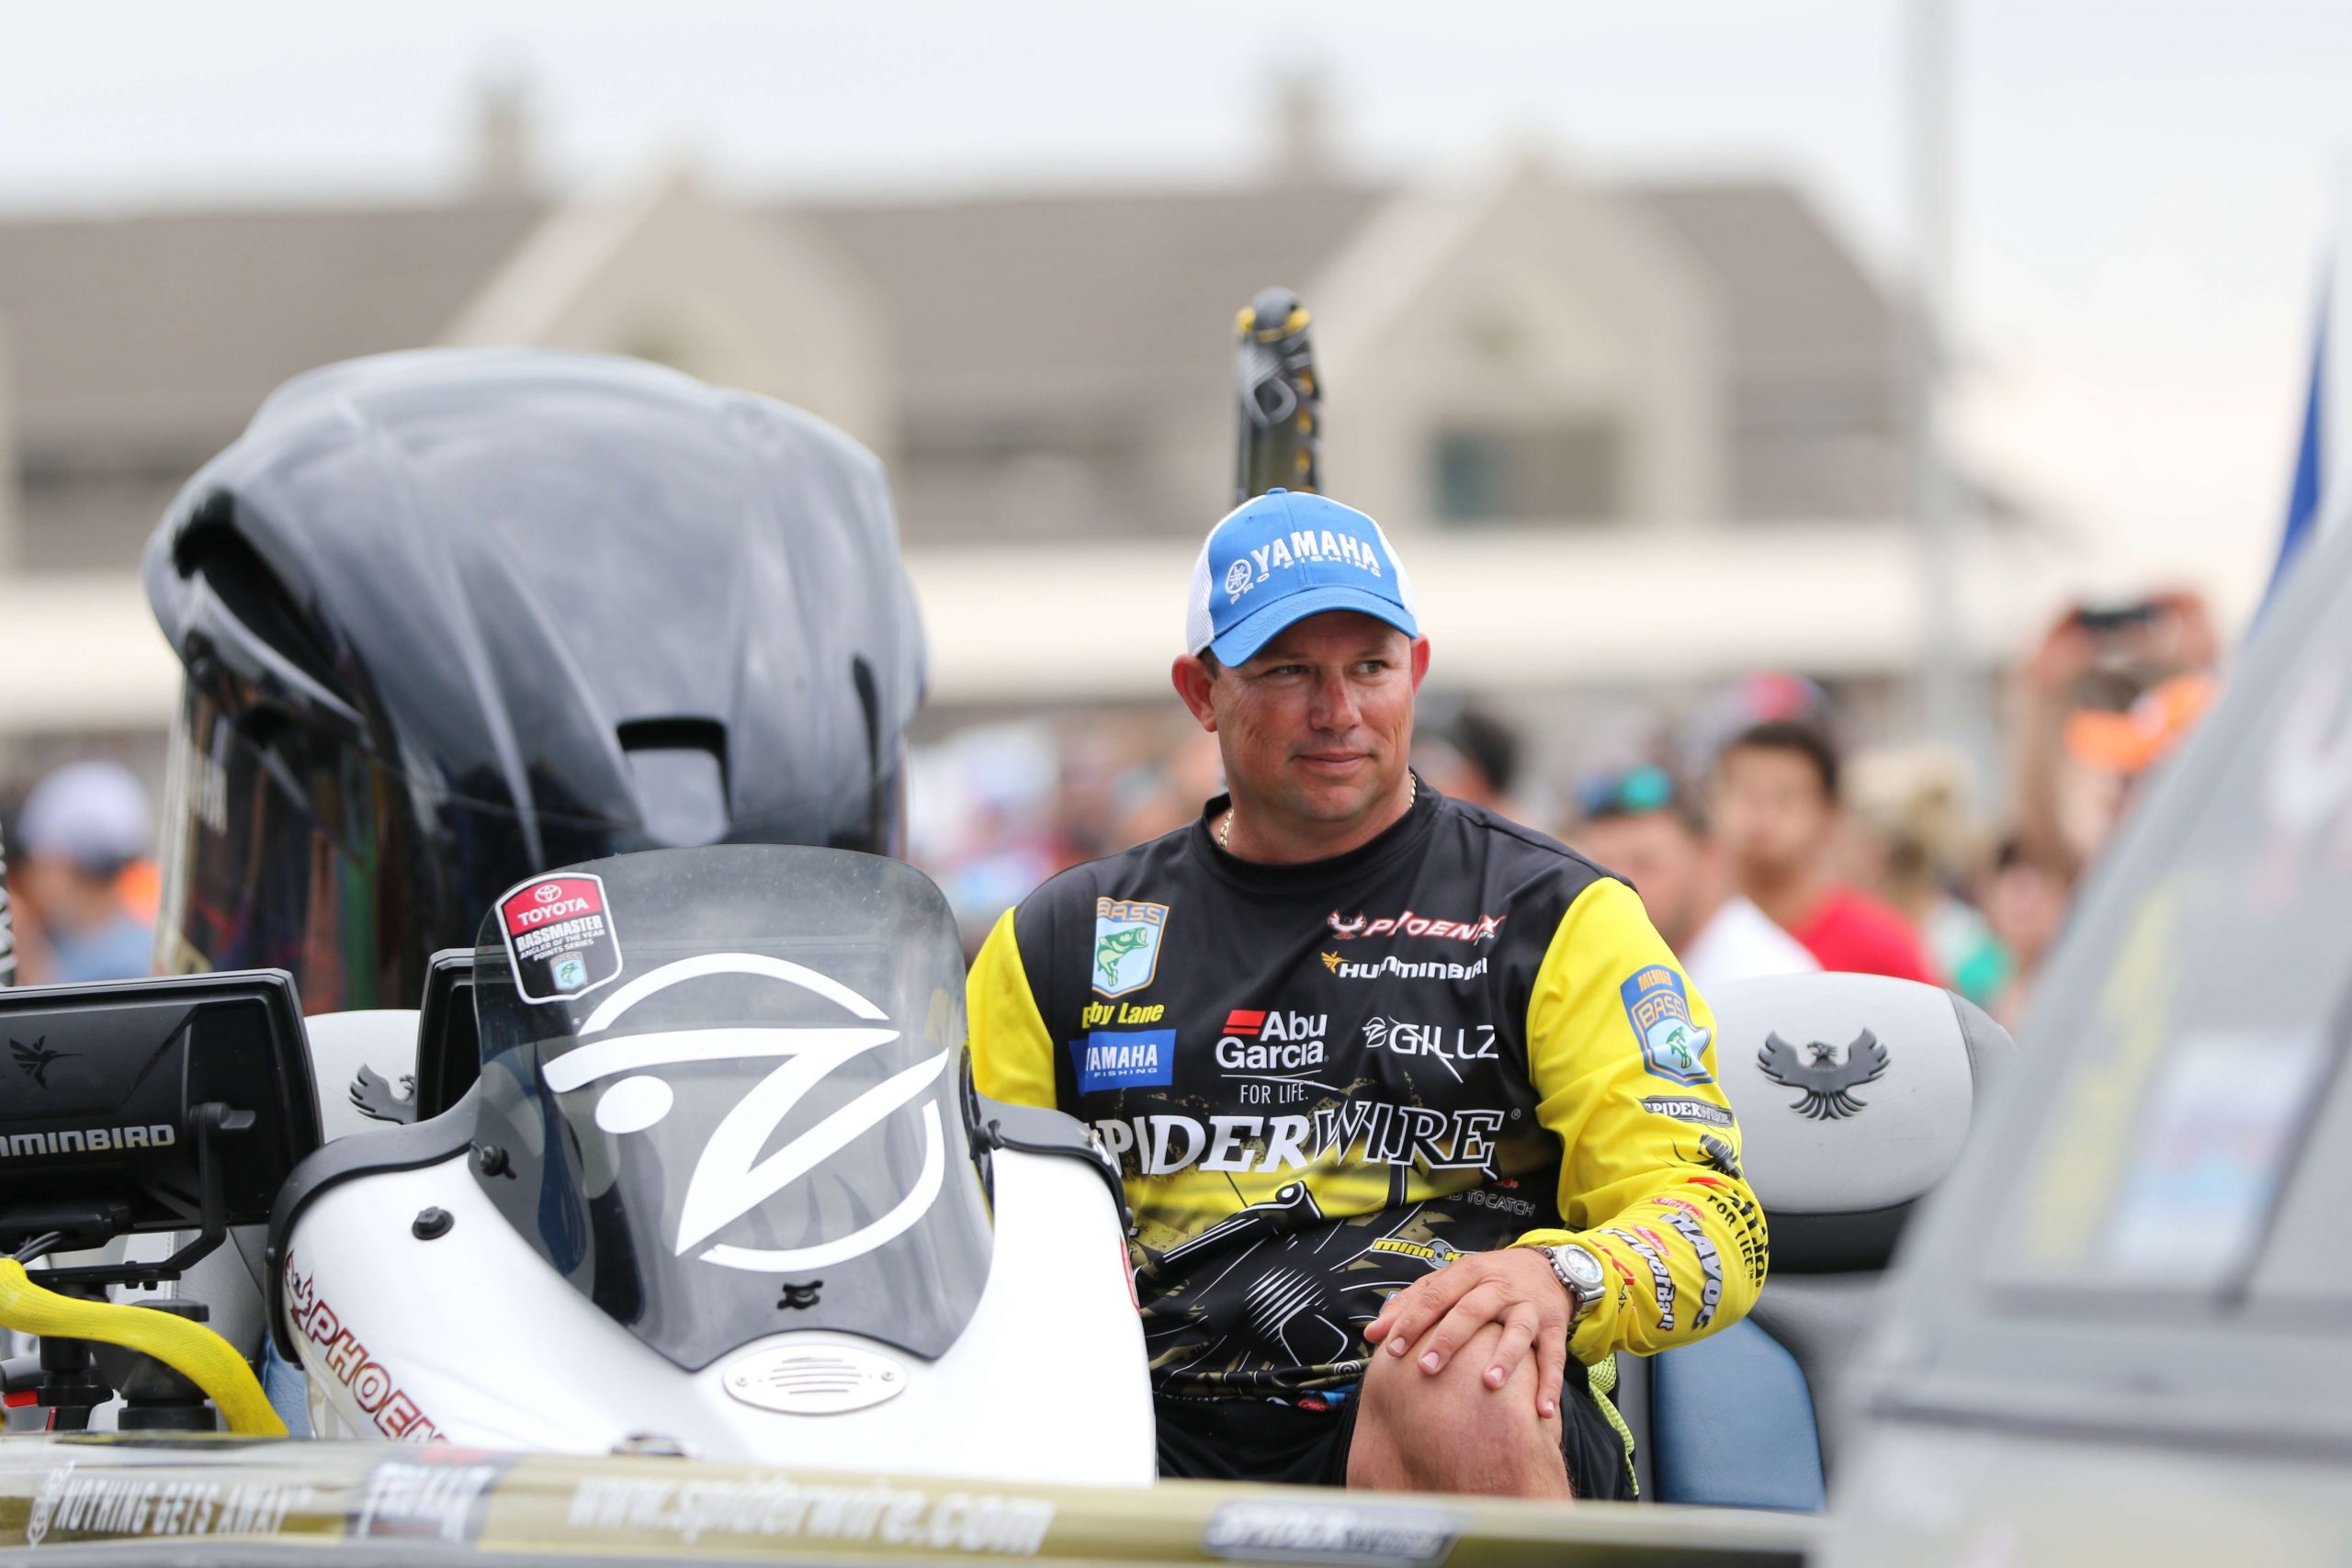 Bobby Lane from Lakeland, Fla., has been an angler on the Bassmaster Elite Series since 2008. Through his career, Lane has fished in 110 B.A.S.S. tournaments, and he landed a Bassmaster Elite Series win on Kentucky Lake in 2009. The accomplished angler answered 20 questions about his past, present and future in professional bass fishing.